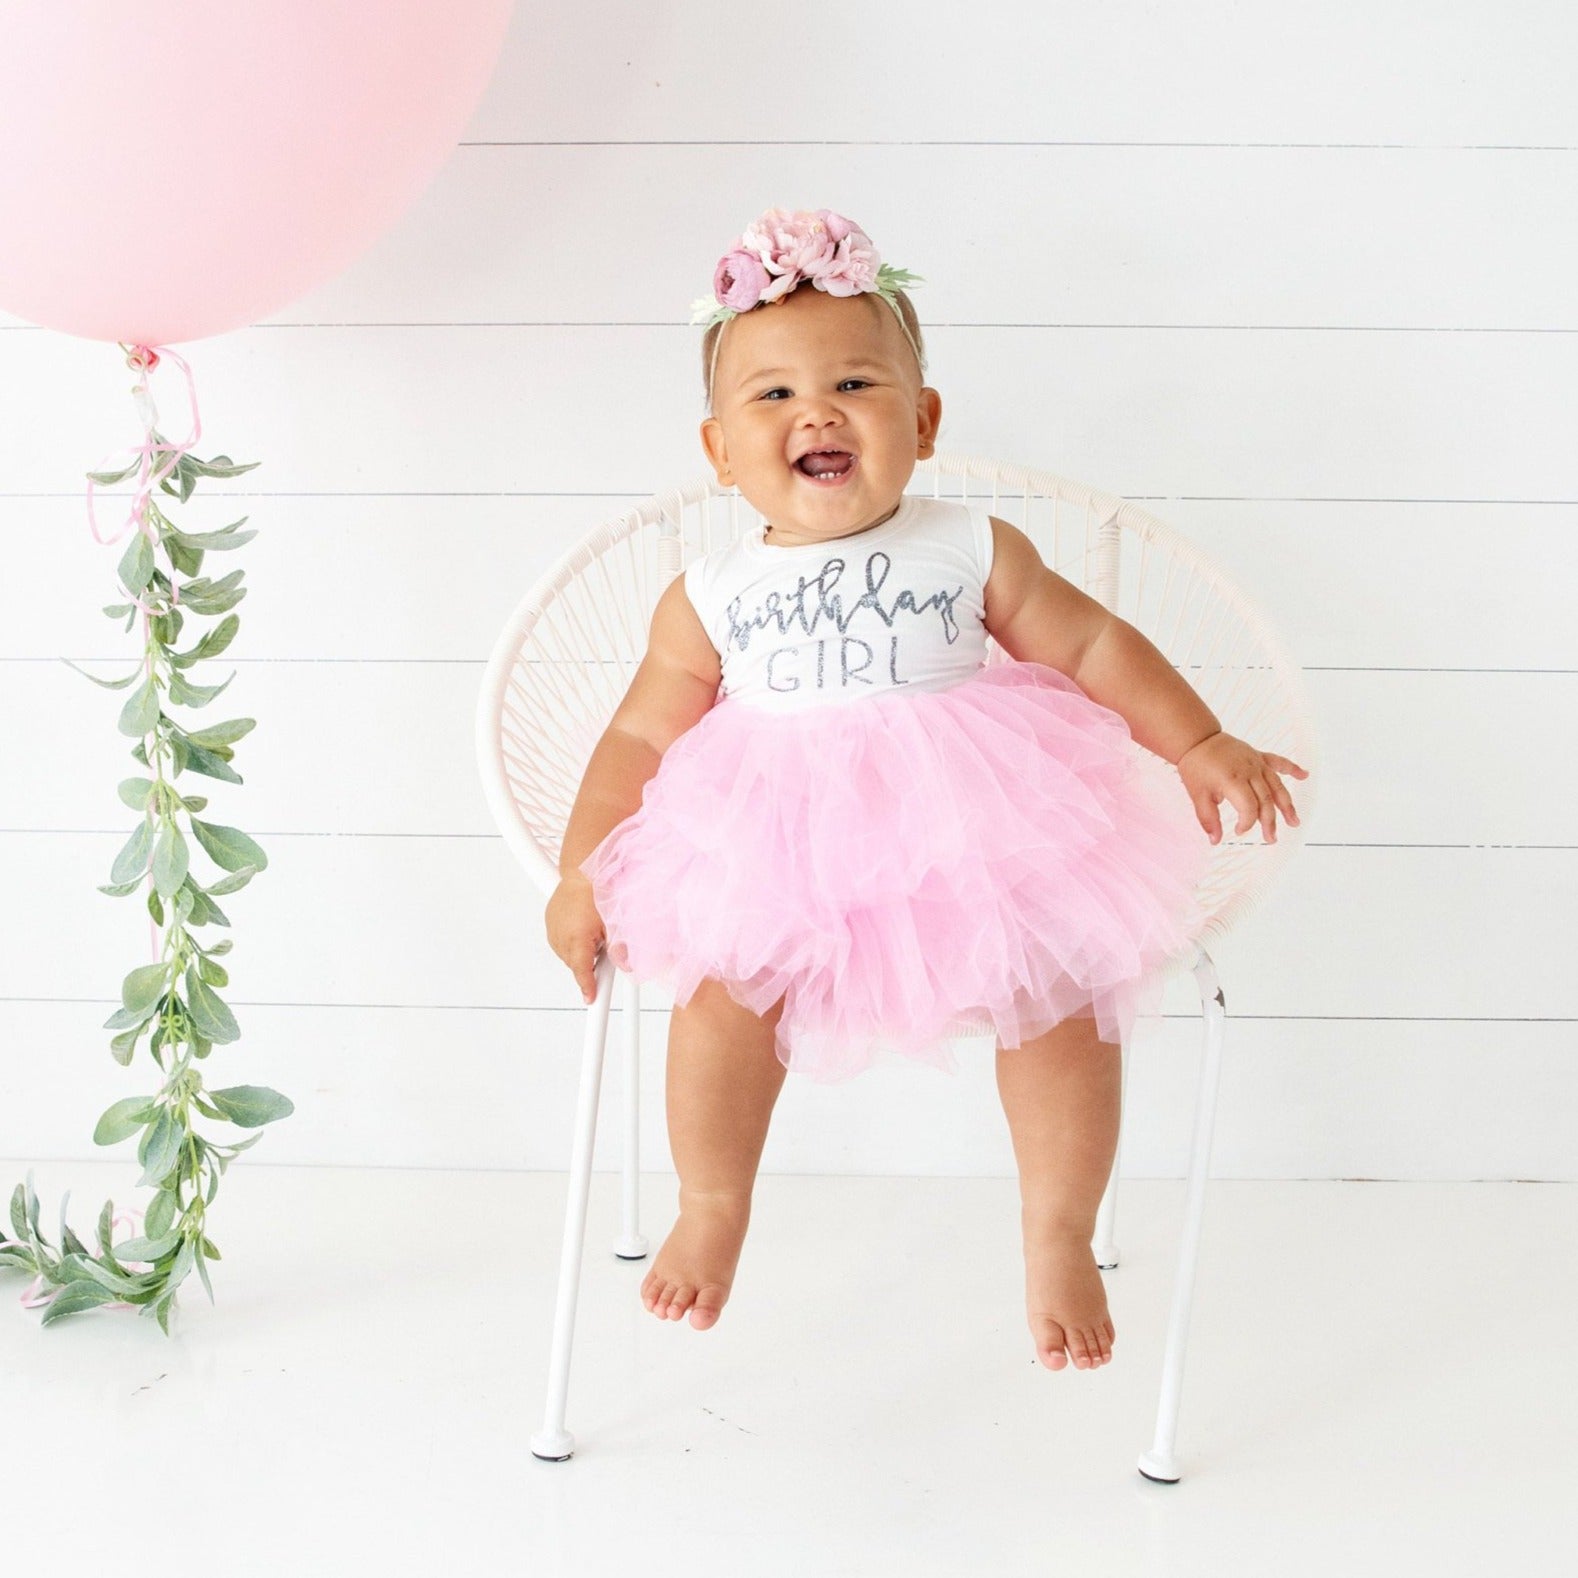 Pin by Pearls Daughter on BDAY PHOTO SHOOT IDEAS | Pink birthday dress,  Birthday fashion, 16th birthday outfit